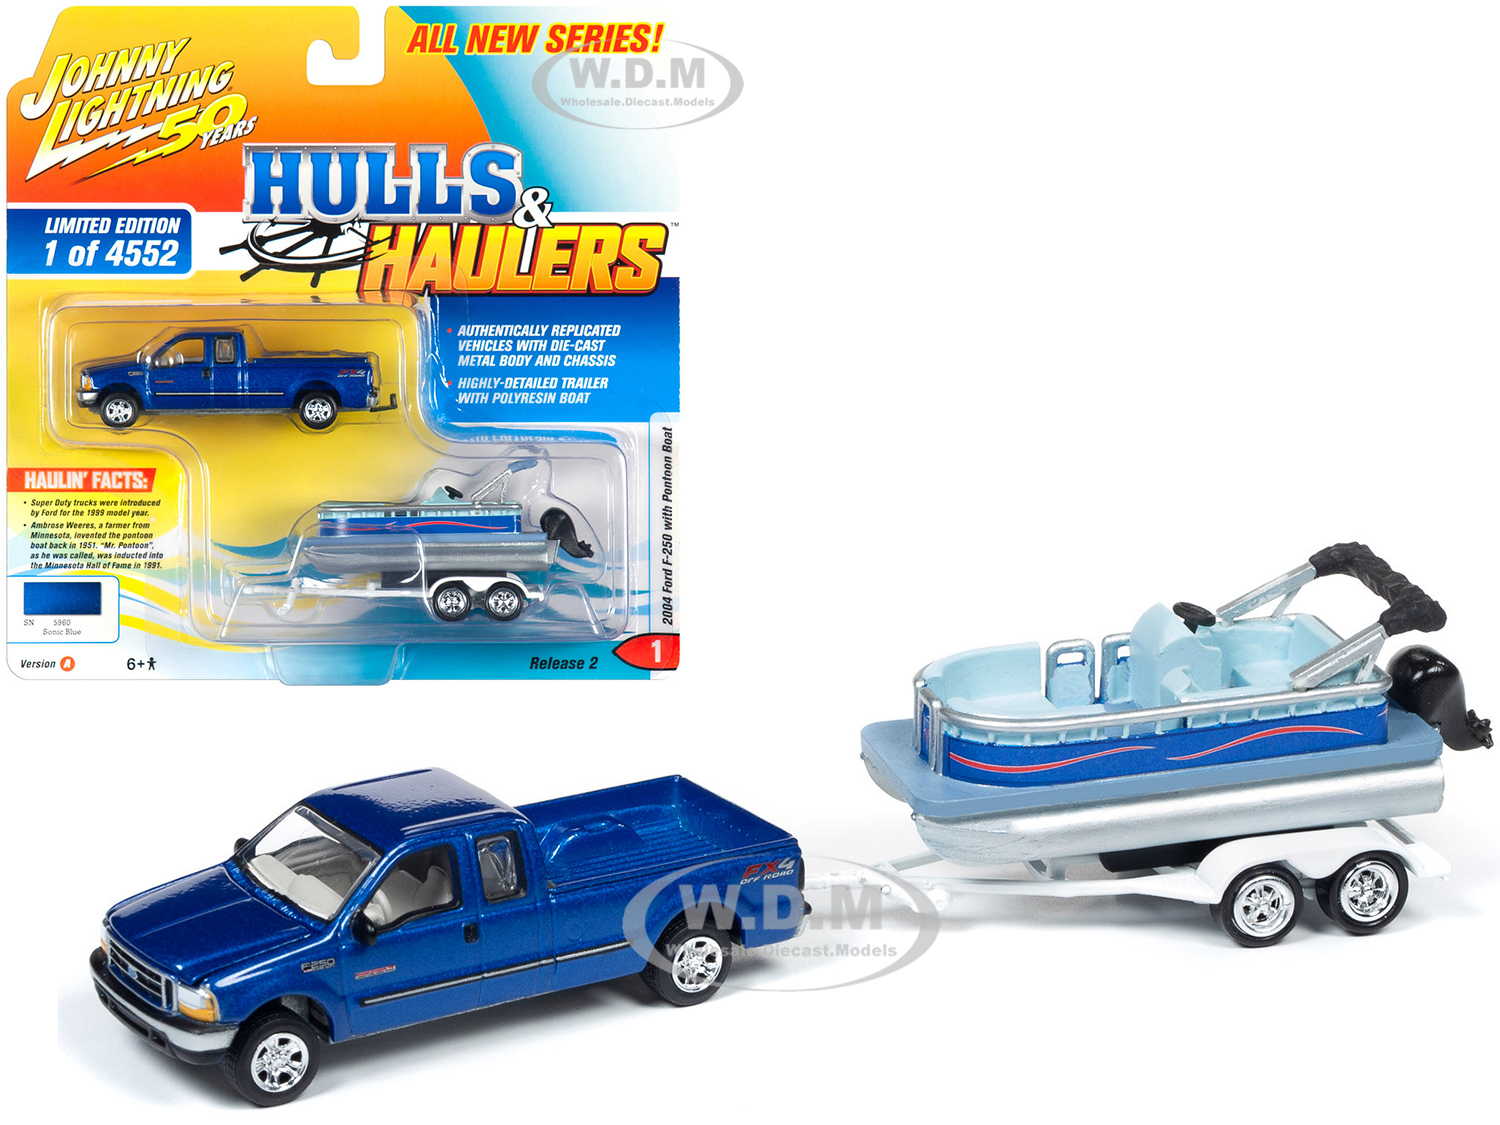 2004 Ford F-250 Pickup Truck Sonic Blue Metallic With Pontoon Boat Limited Edition To 4552 Pieces Worldwide "hulls & Haulers" Series 2 "johnny Li